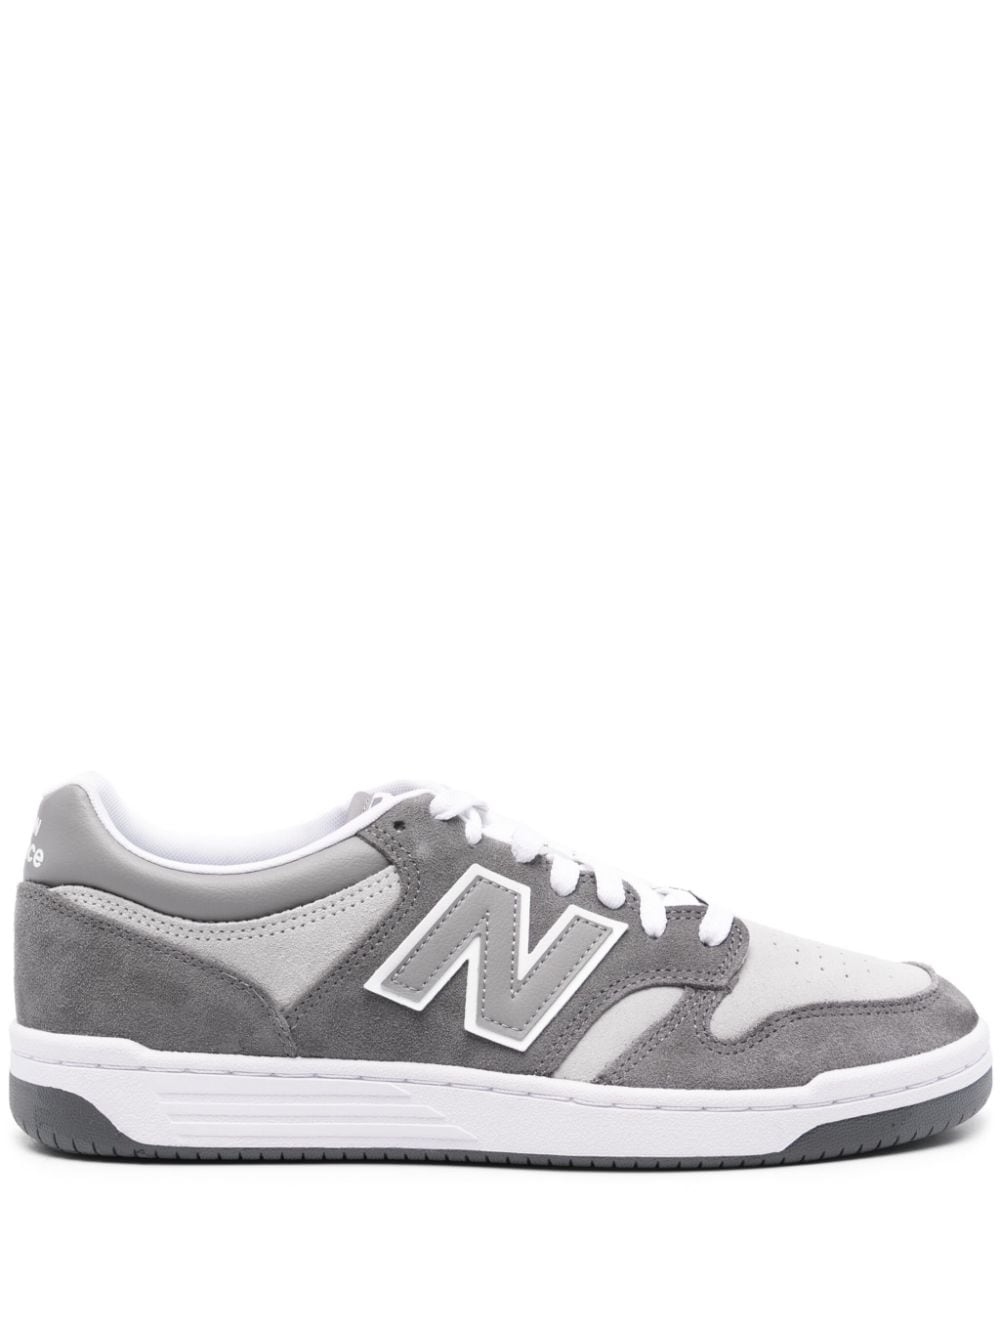 New Balance 480 suede sneakers Grey